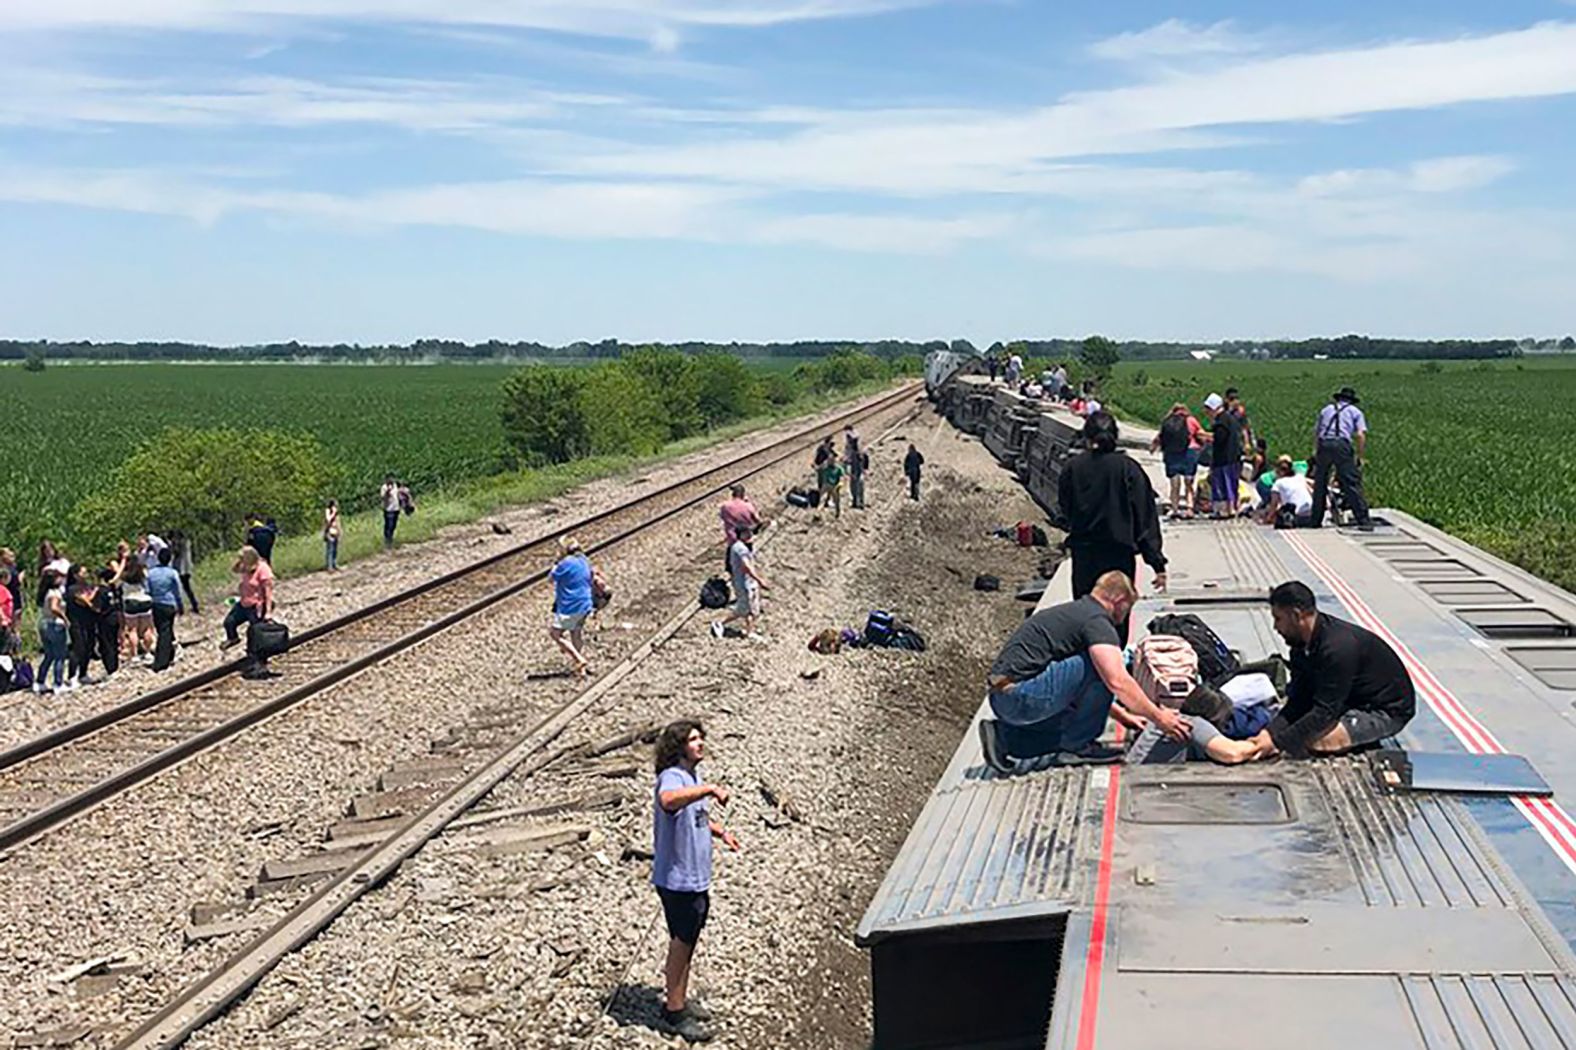 An Amtrak train lies on its side after <a href="https://www.cnn.com/2022/06/27/us/missouri-amtrak-train-derailment/index.html" target="_blank">derailing </a>near Mendon, Missouri, on Monday, June 27. Three people died and at least 50 were injured after the train hit a dump truck at an uncontrolled intersection.